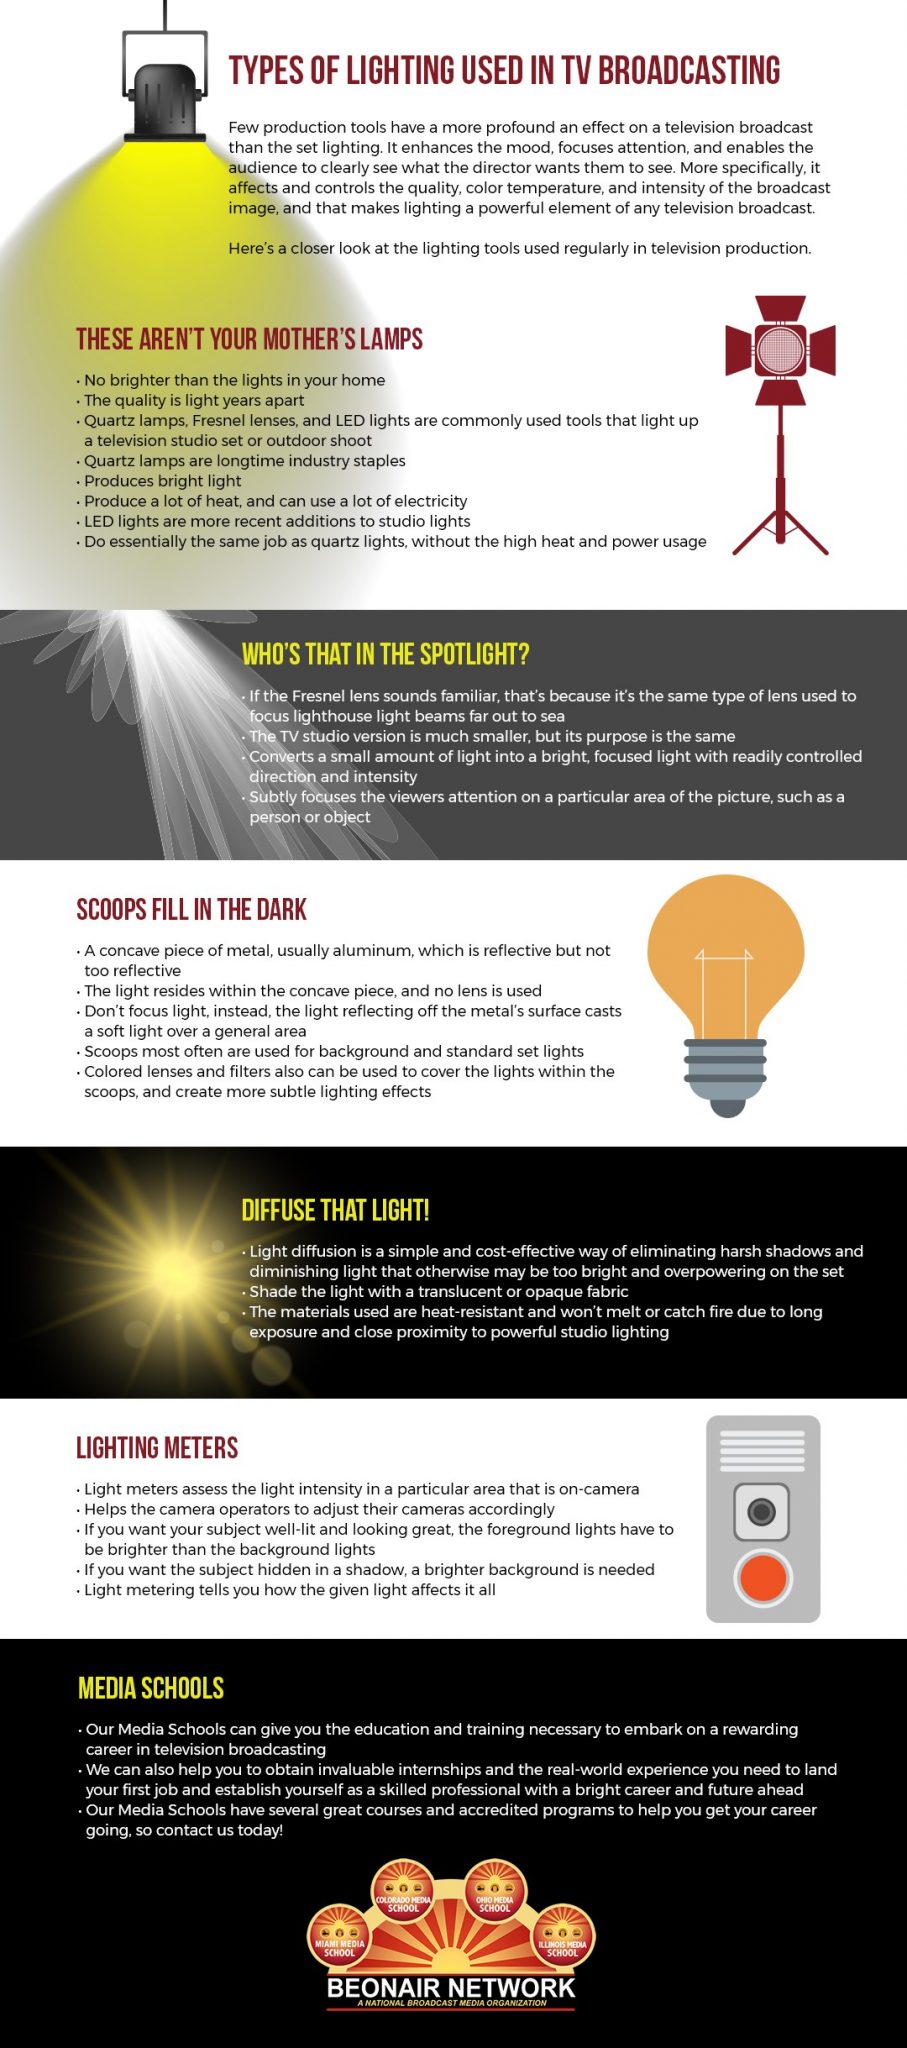 TYPES OF LIGHTING USED IN TV BROADCASTING